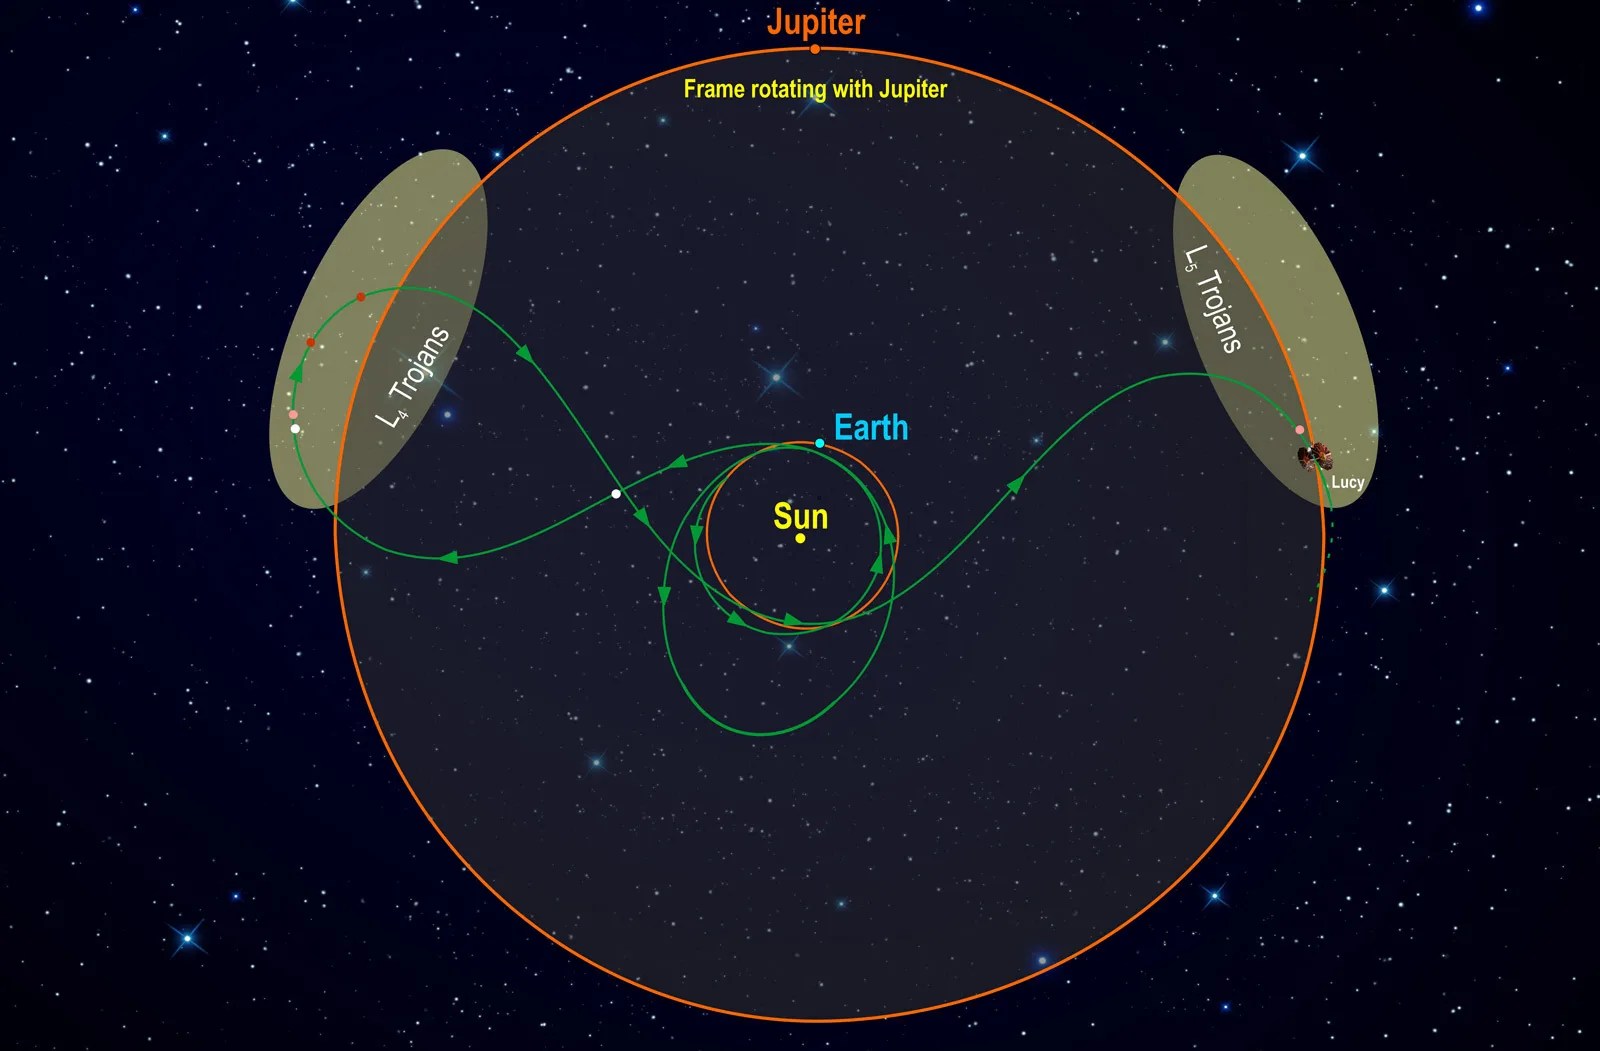 Illustration of looping orbits to reach asteroids in front of and behind Jupiter.